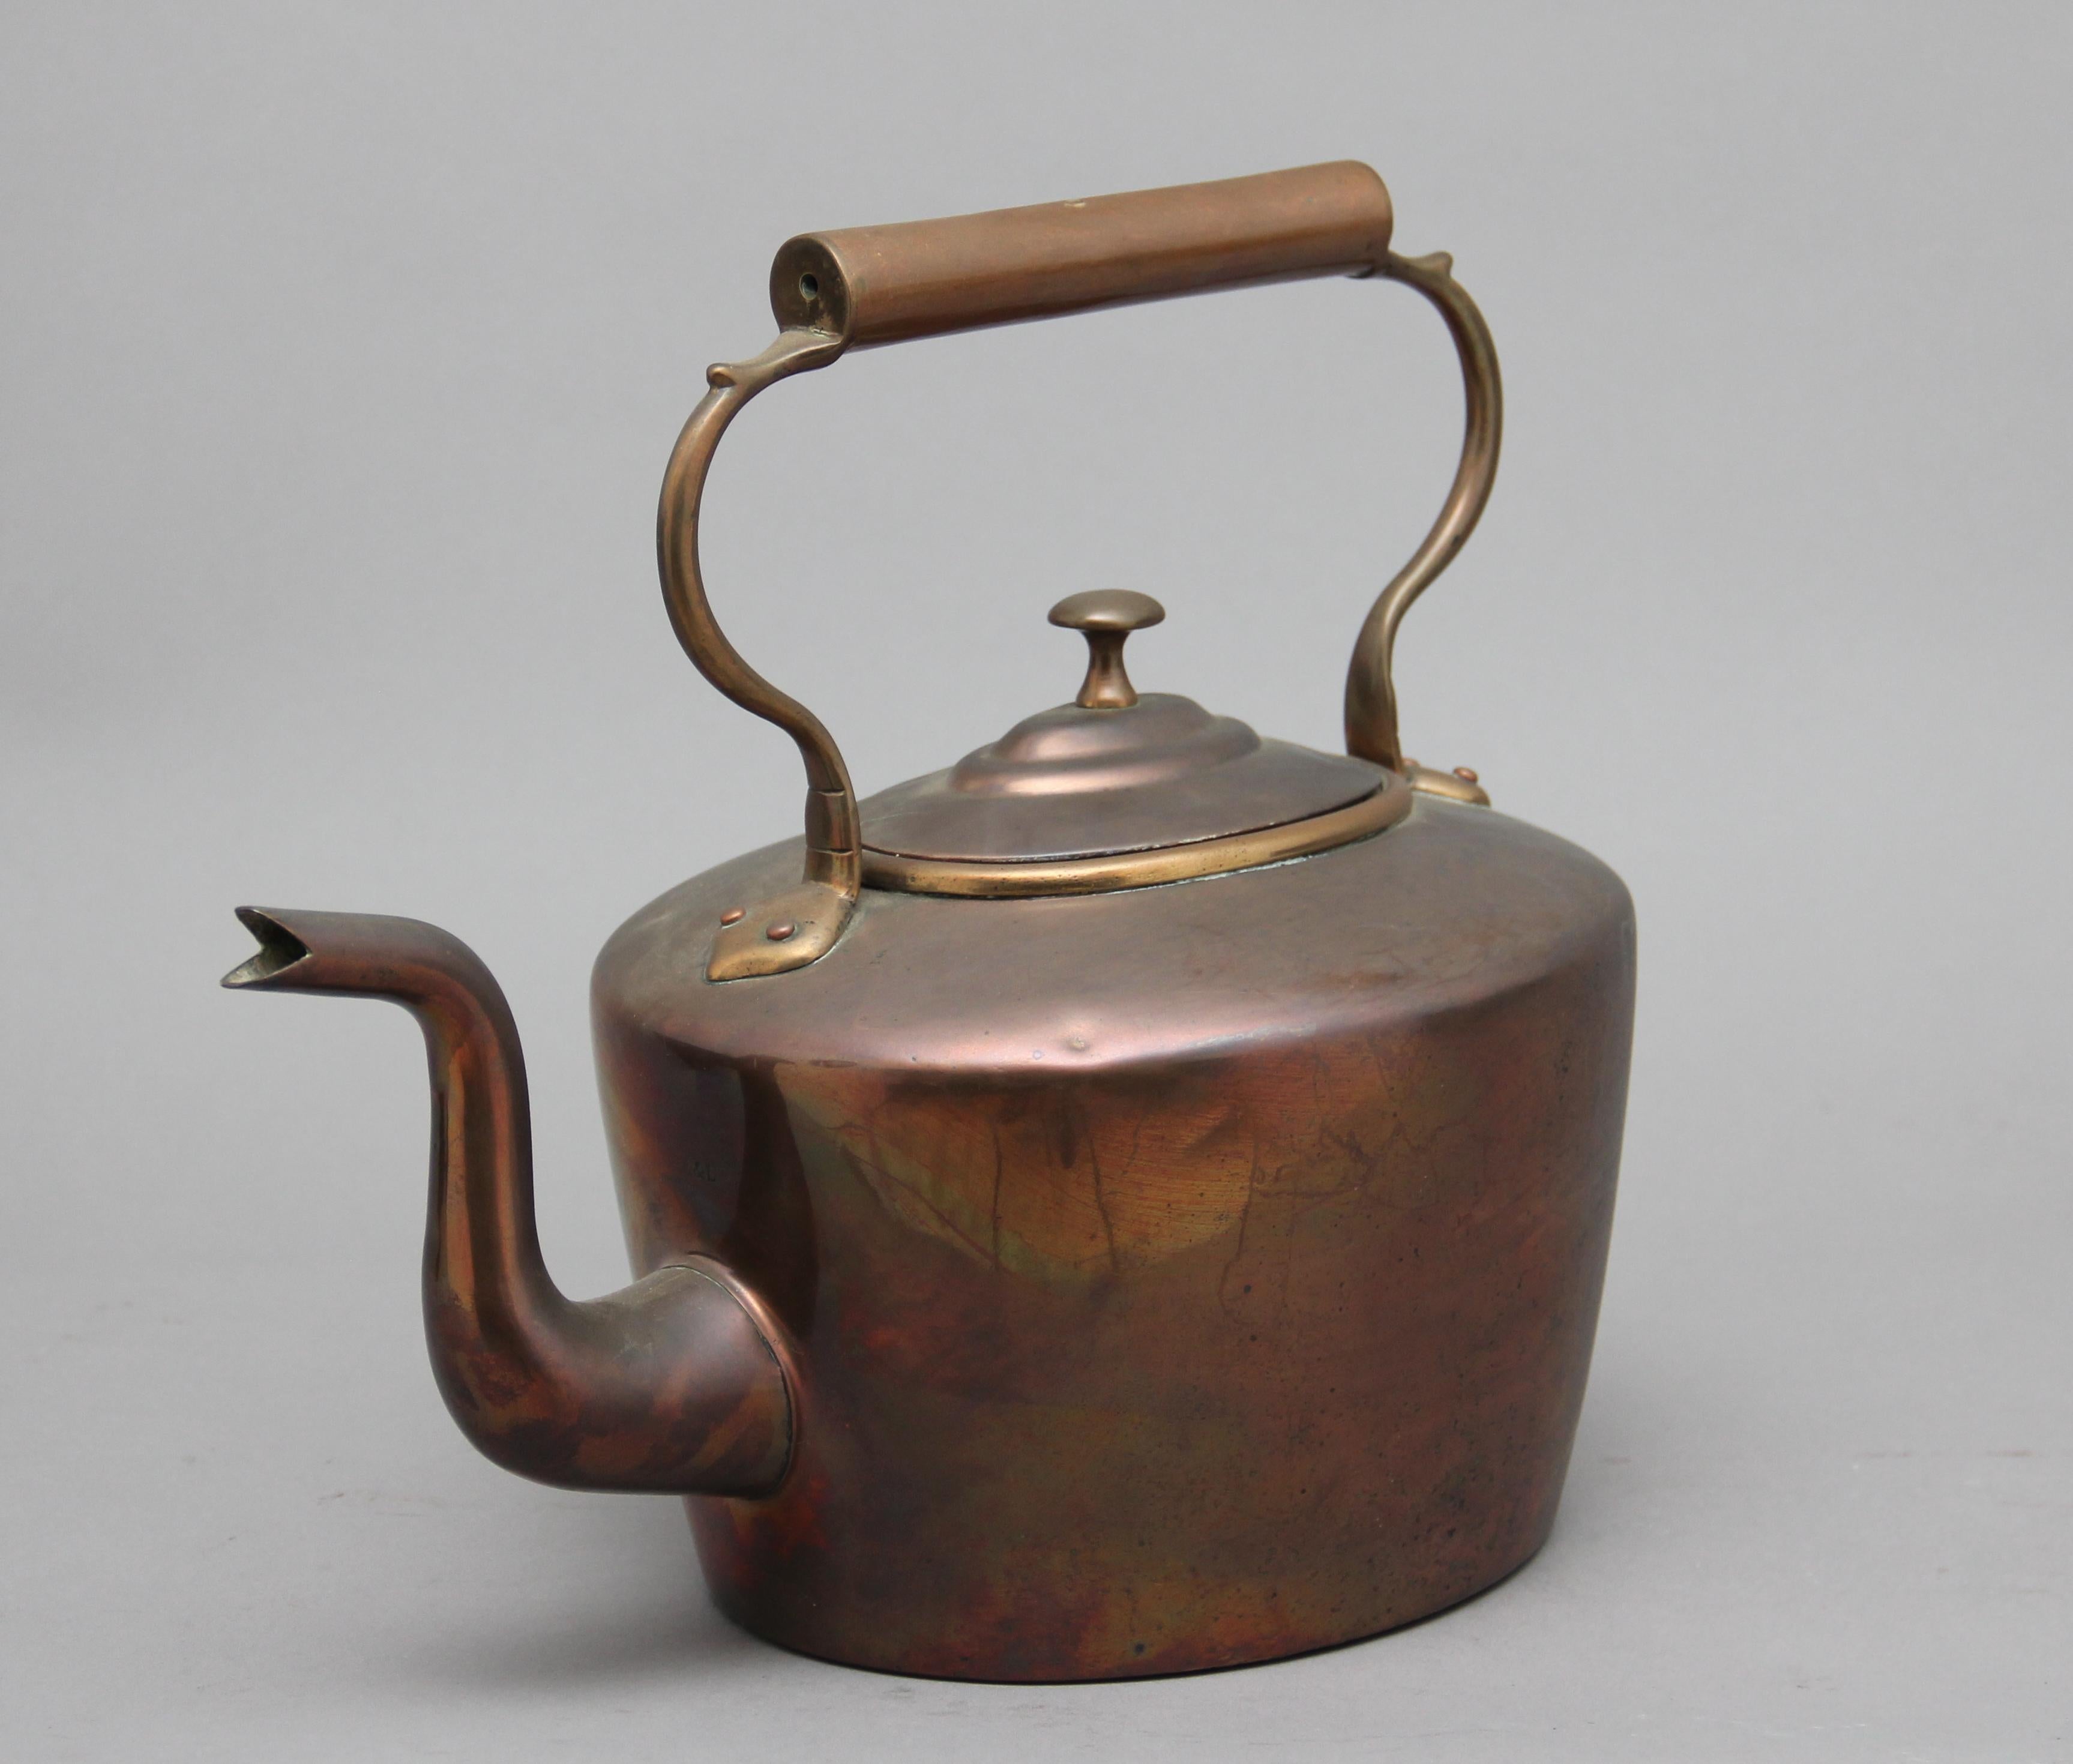 19th century brass copper kettle, having a shaped handle, acorn finial on the lid and a shaped spout, circa 1860.